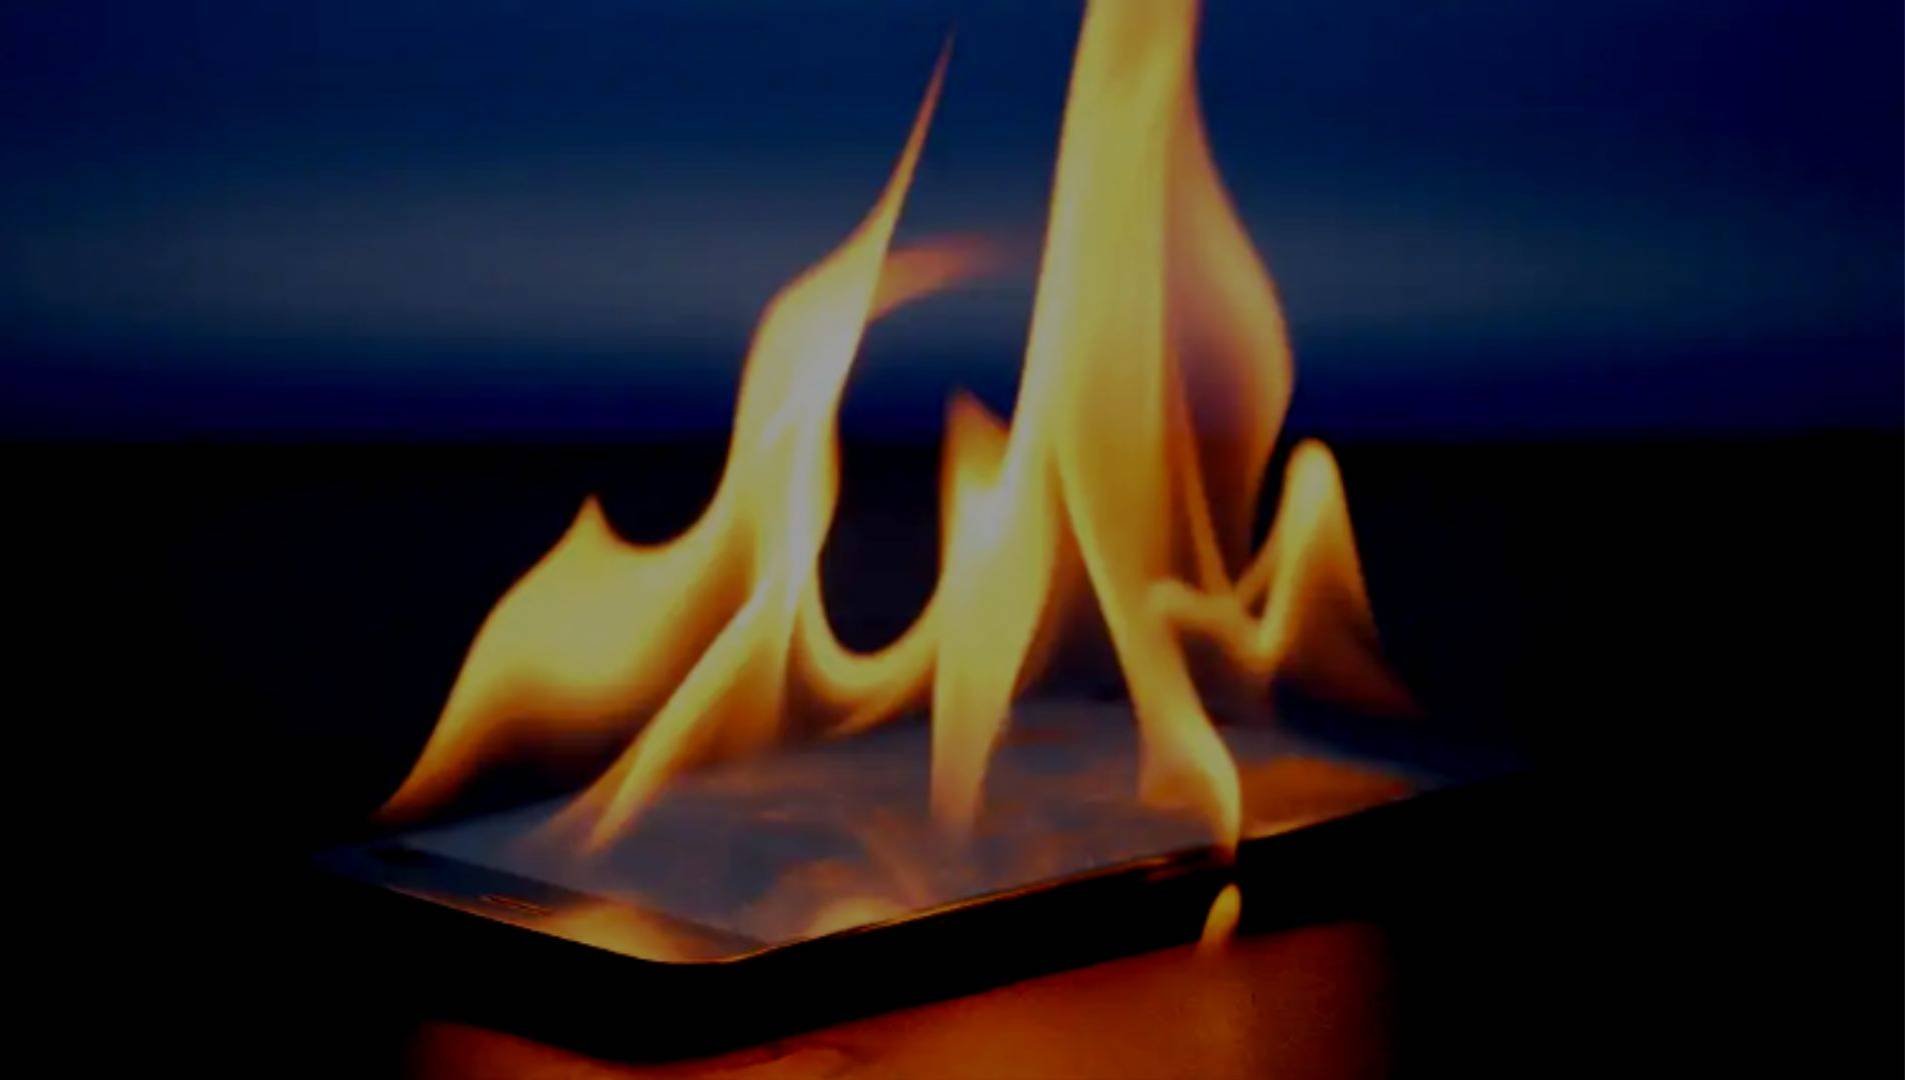 A photo of a phone on fire.